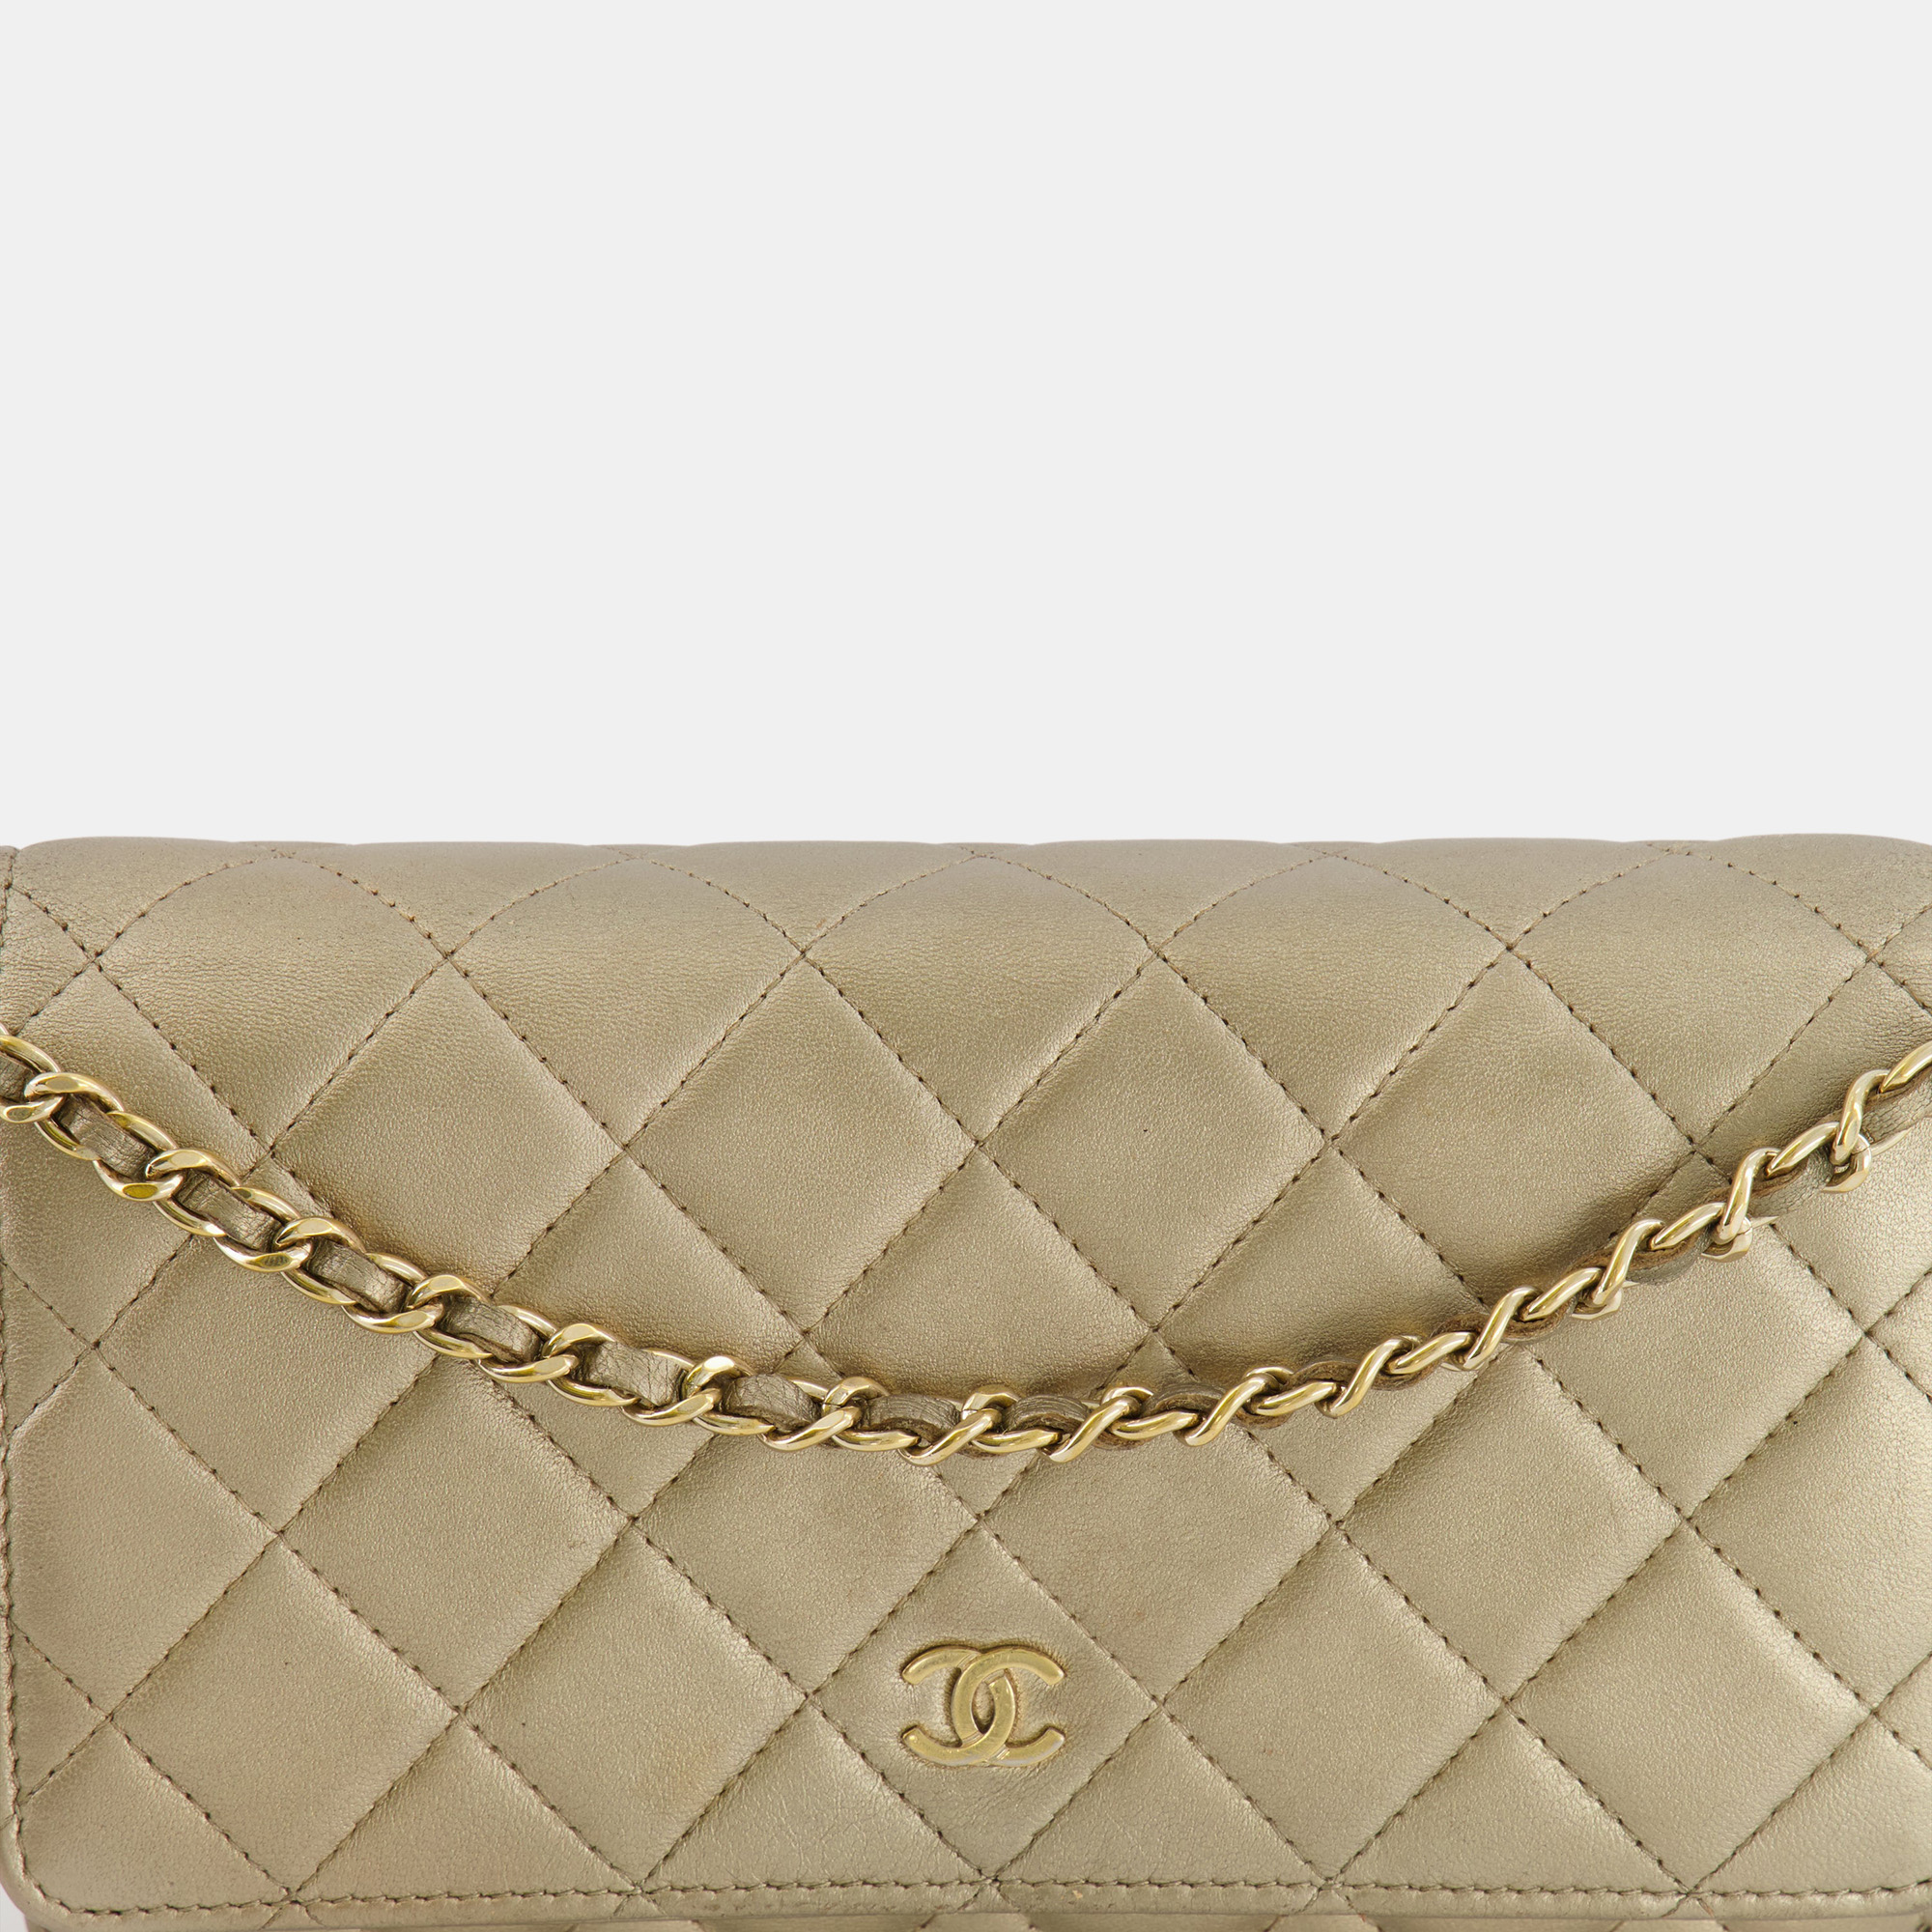 Chanel Metallic Gold Wallet On Chain Bag In Lambskin Leather With Gold Hardware